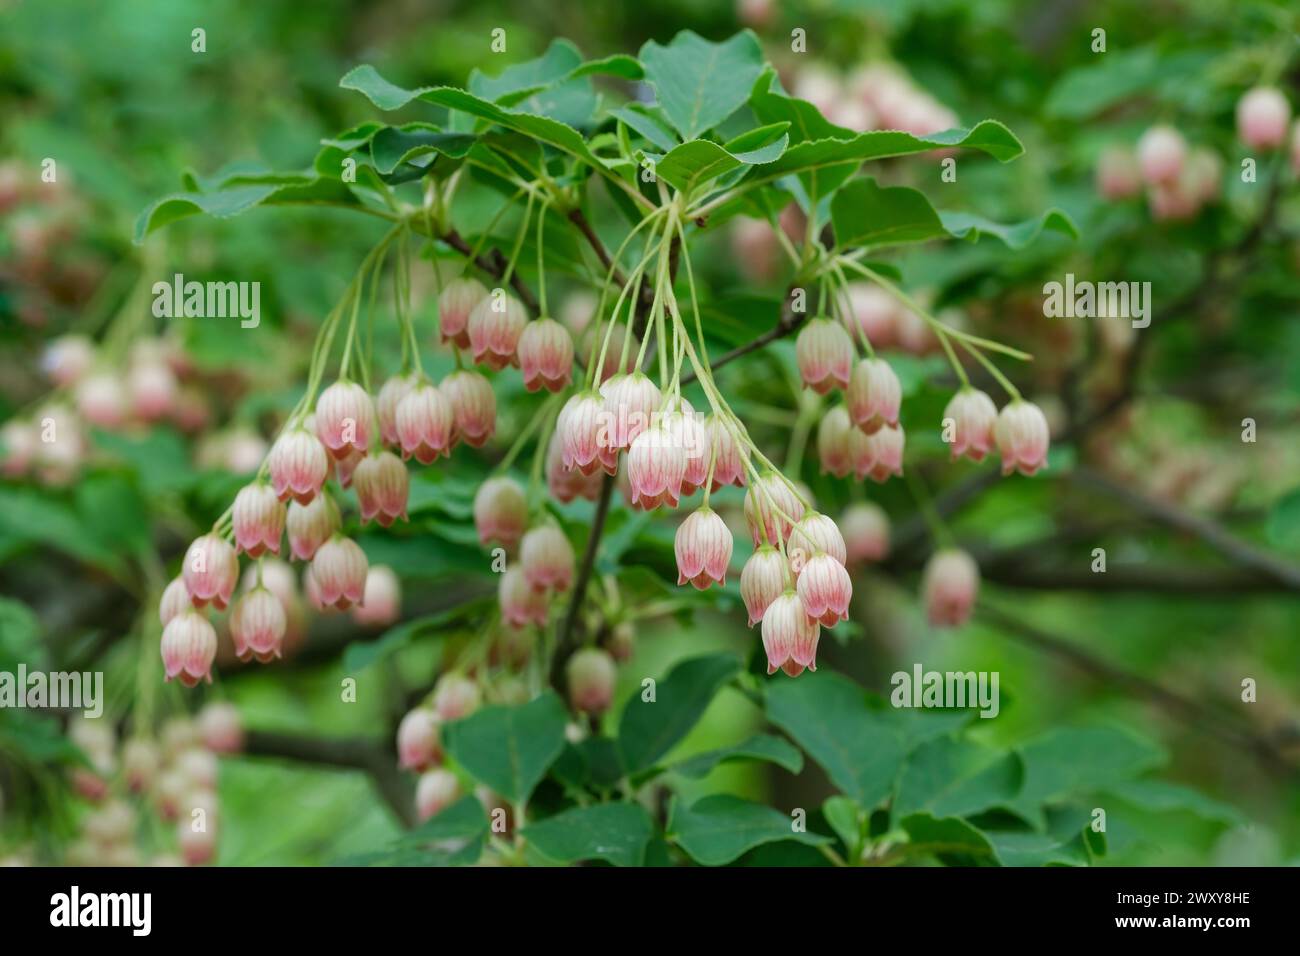 Chinese enkianthus, Enkianthus himalaicus var. chinensis, clusters of bell-shaped, cream flowers, pink veins Stock Photo